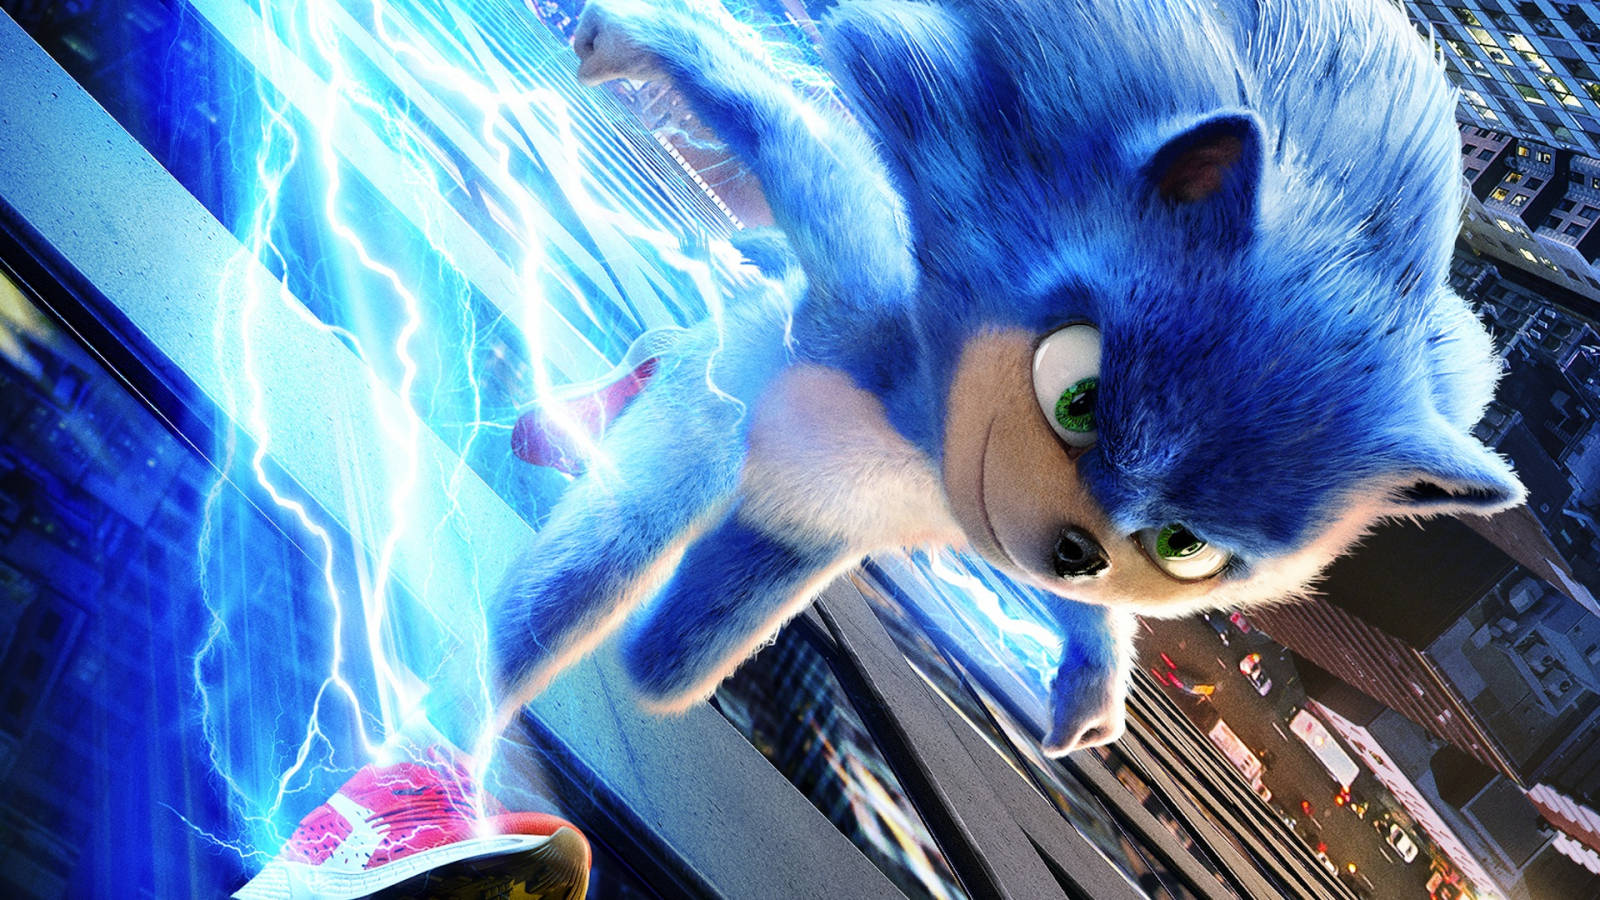 Caption: Sonic The Hedgehog In High Speed Action